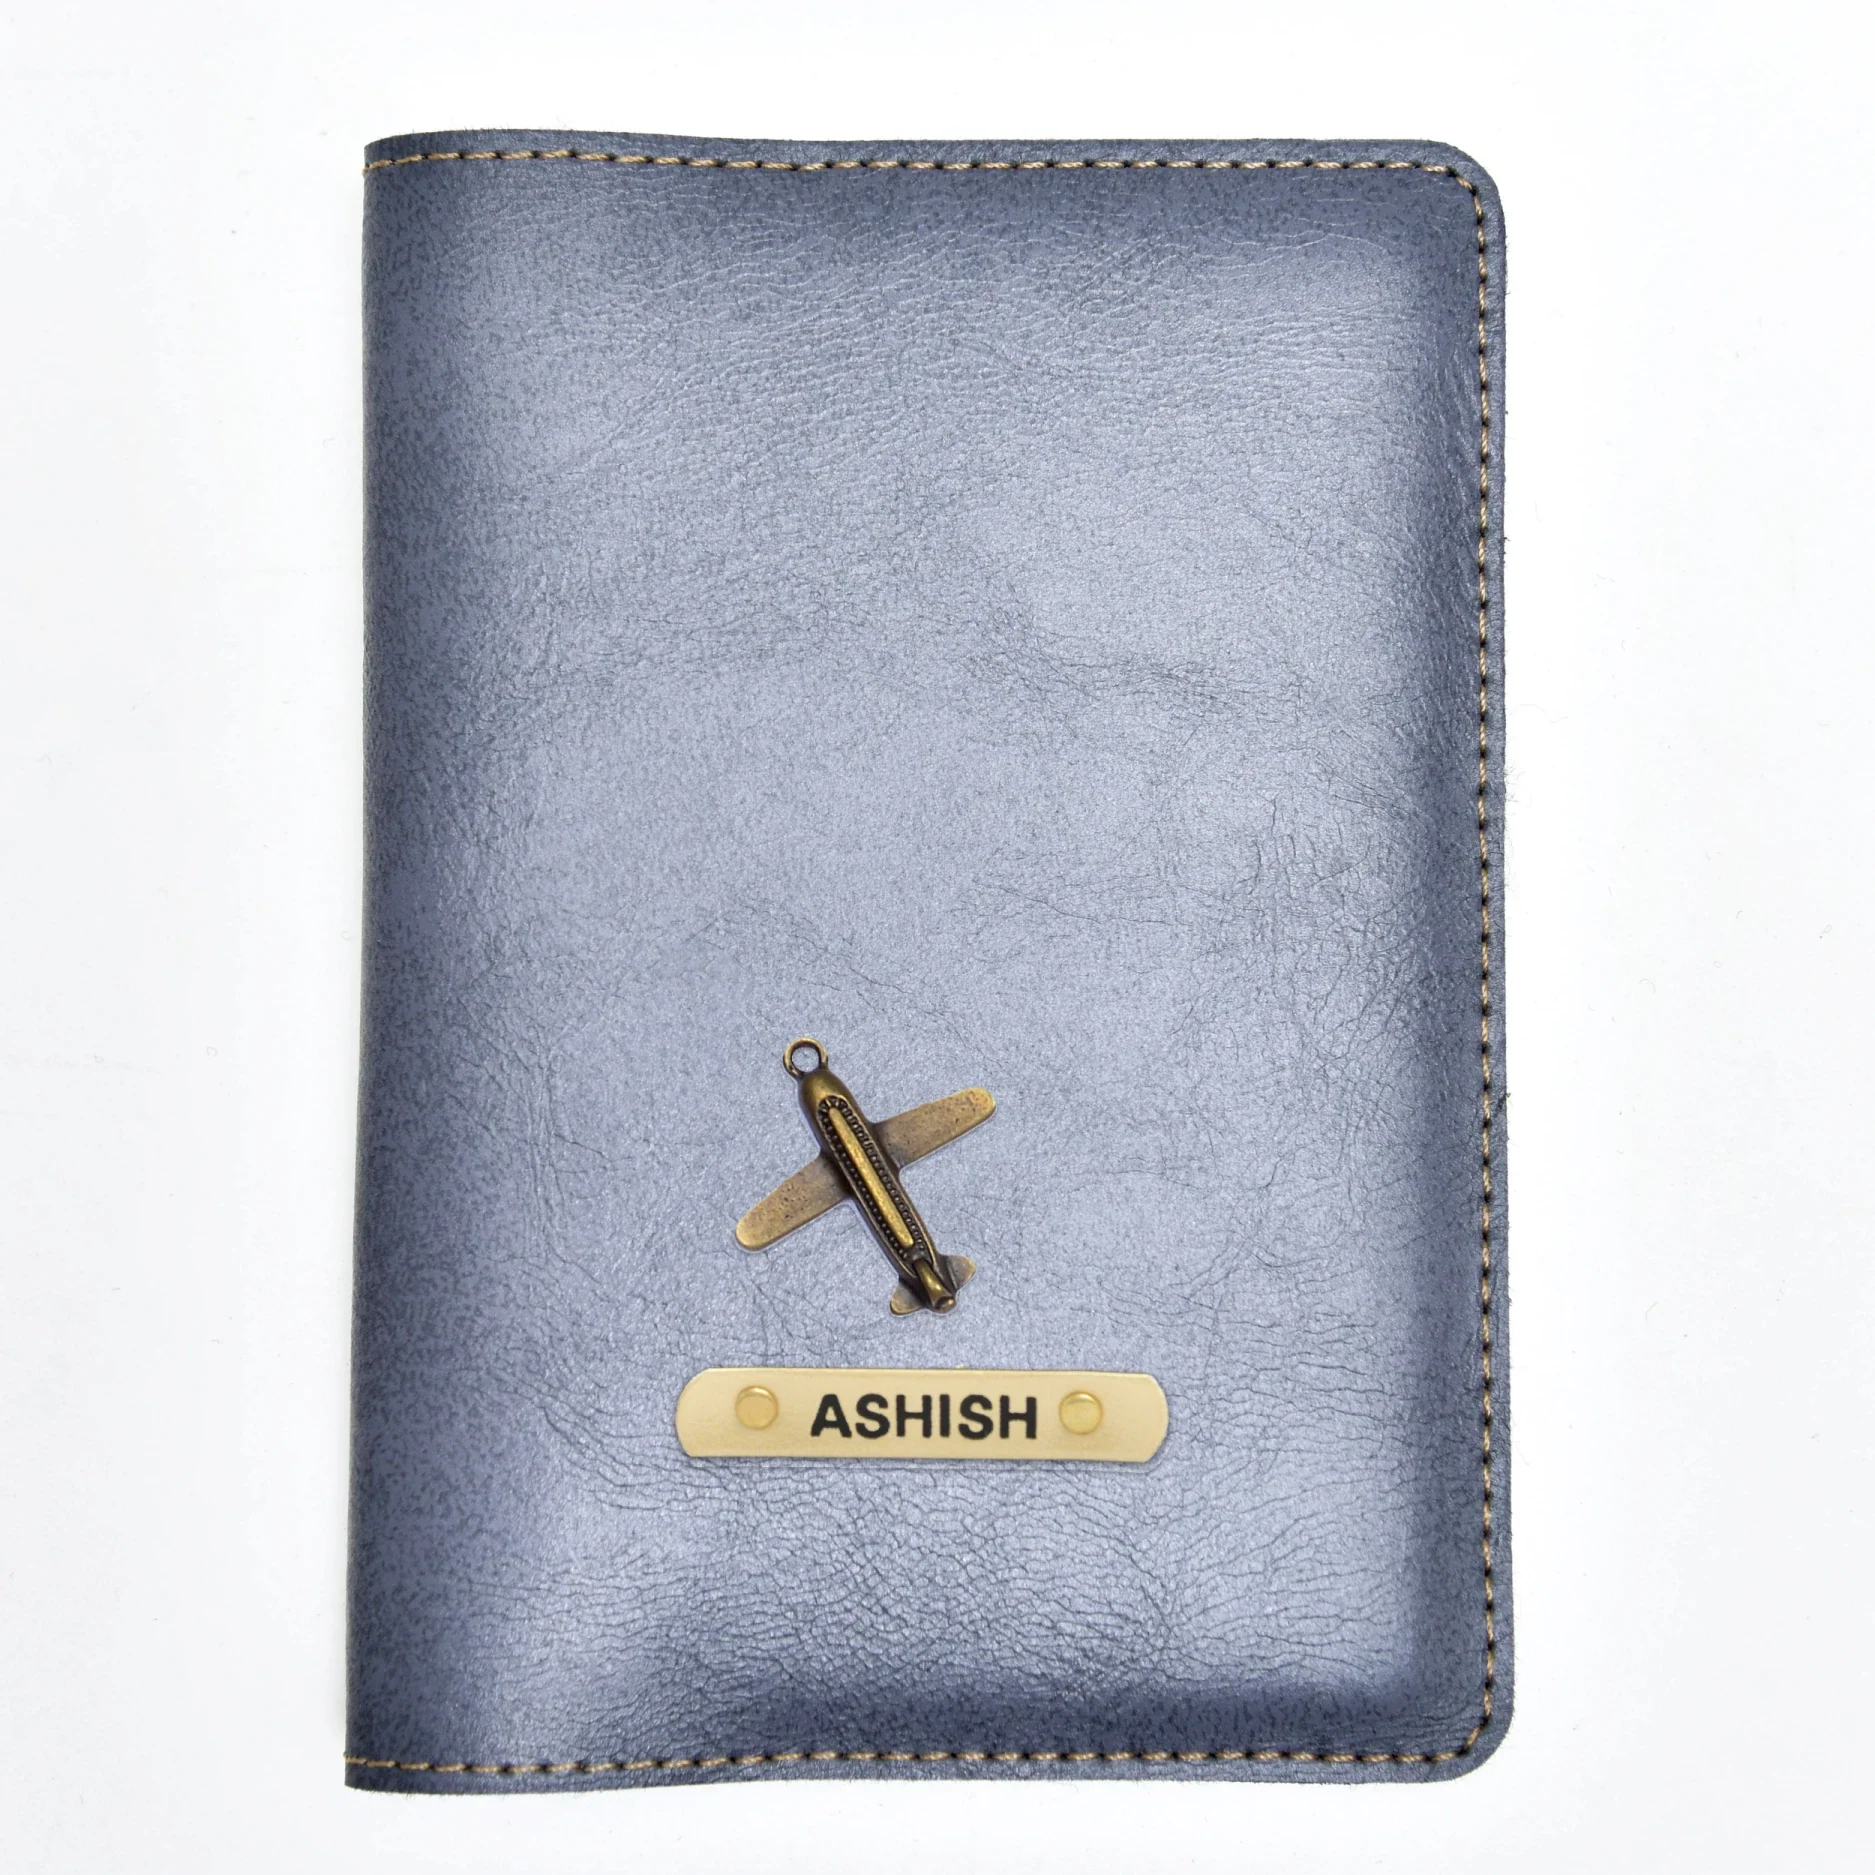 Protect your travel document in the utmost style with a classy leather passport case tailored to your preferences.